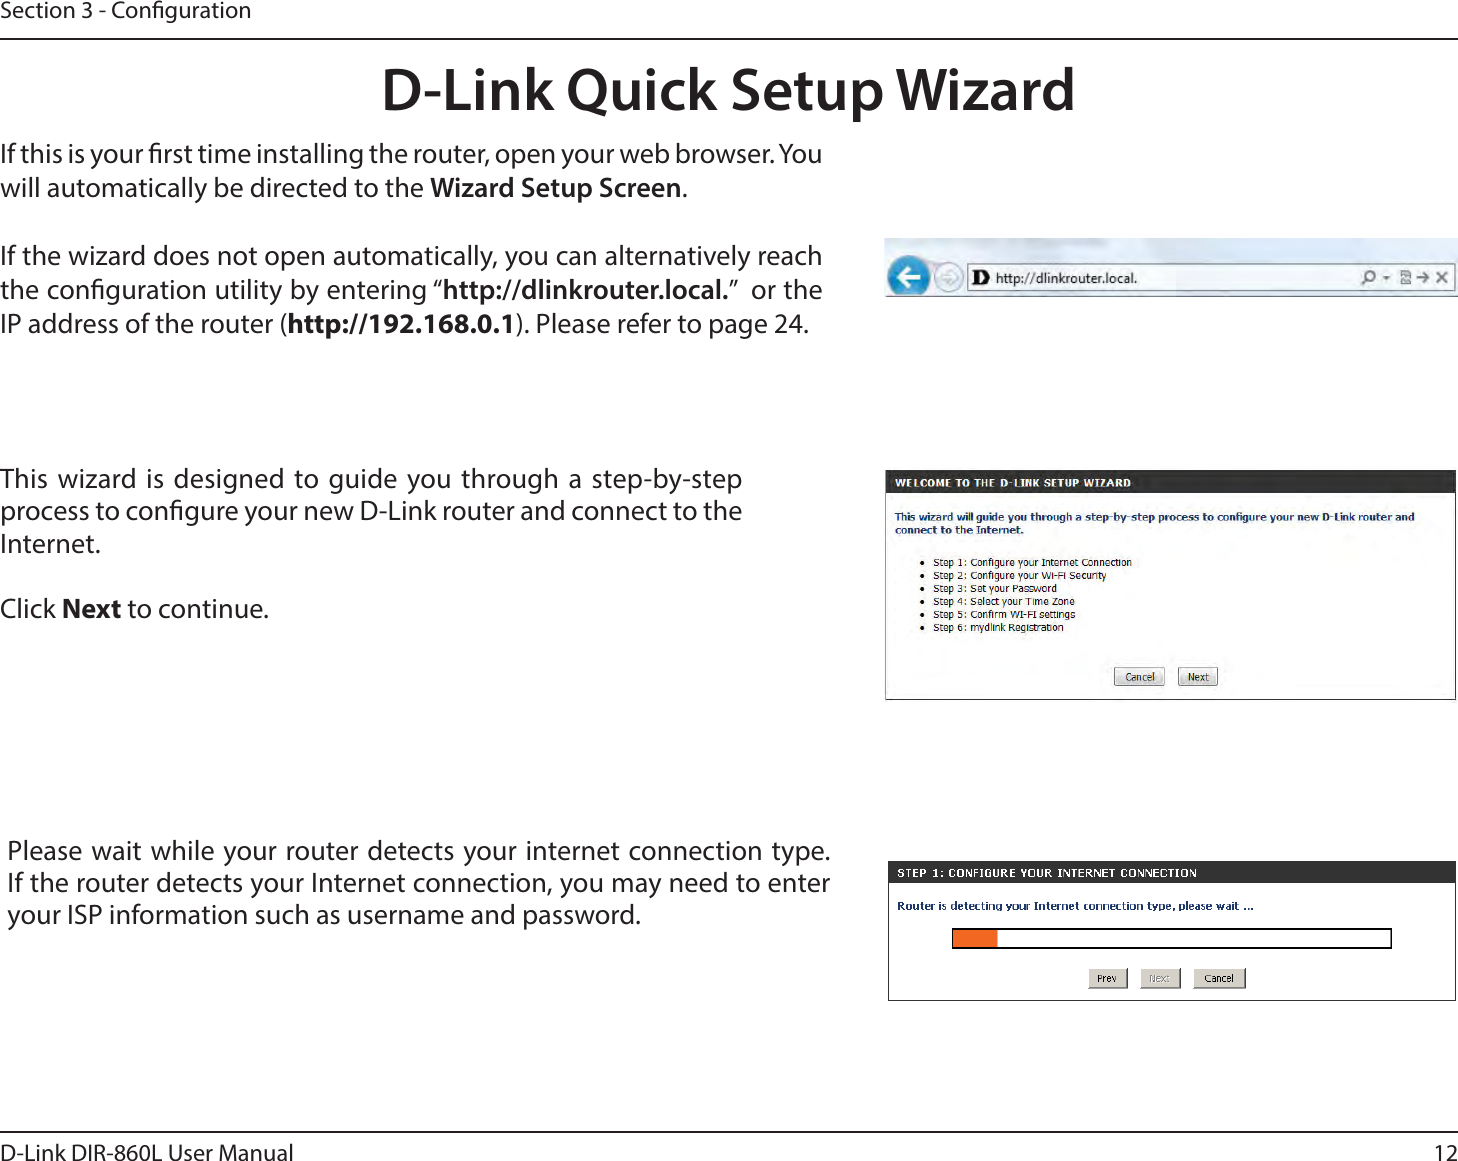 12D-Link DIR-860L User ManualSection 3 - CongurationThis wizard is designed to guide you through a step-by-step process to congure your new D-Link router and connect to the Internet.Click Next to continue. D-Link Quick Setup WizardIf this is your rst time installing the router, open your web browser. You will automatically be directed to the Wizard Setup Screen. If the wizard does not open automatically, you can alternatively reach the conguration utility by entering “http://dlinkrouter.local.”  or the IP address of the router (IUUQ). Please refer to page 24.Please wait while your router detects your internet connection type. If the router detects your Internet connection, you may need to enter your ISP information such as username and password.